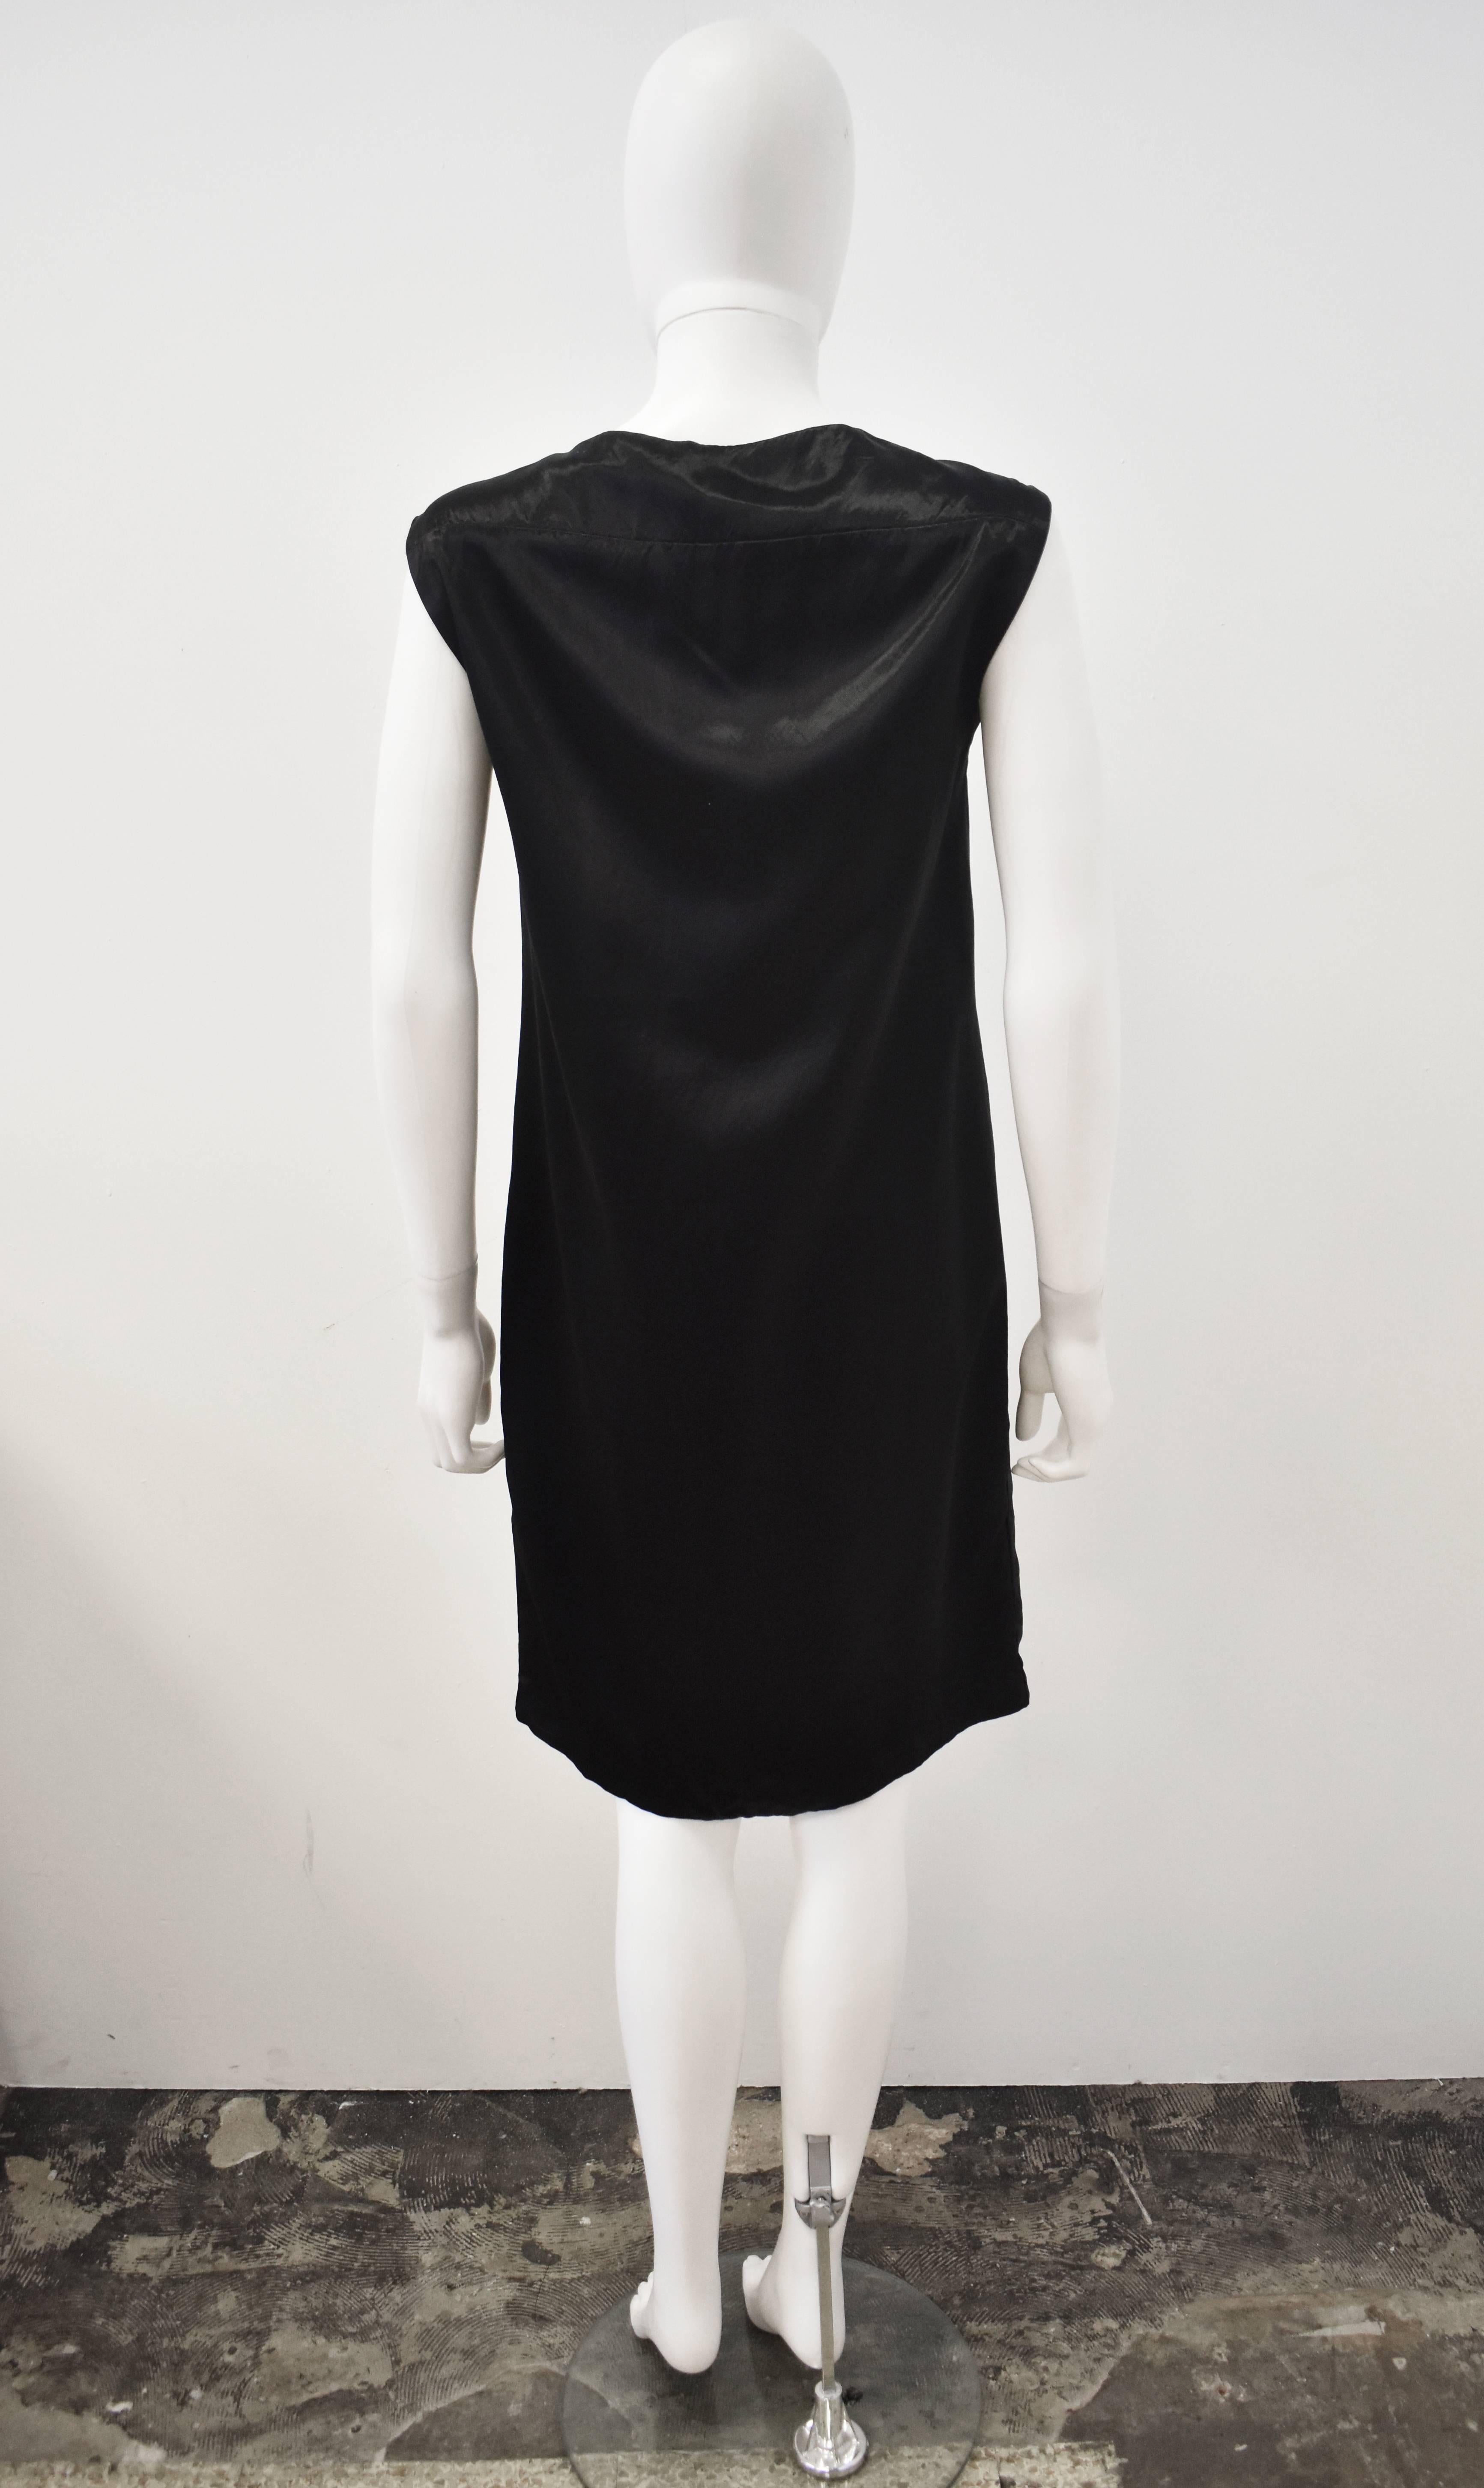 Dries van Noten black button down dress In Excellent Condition For Sale In London, GB